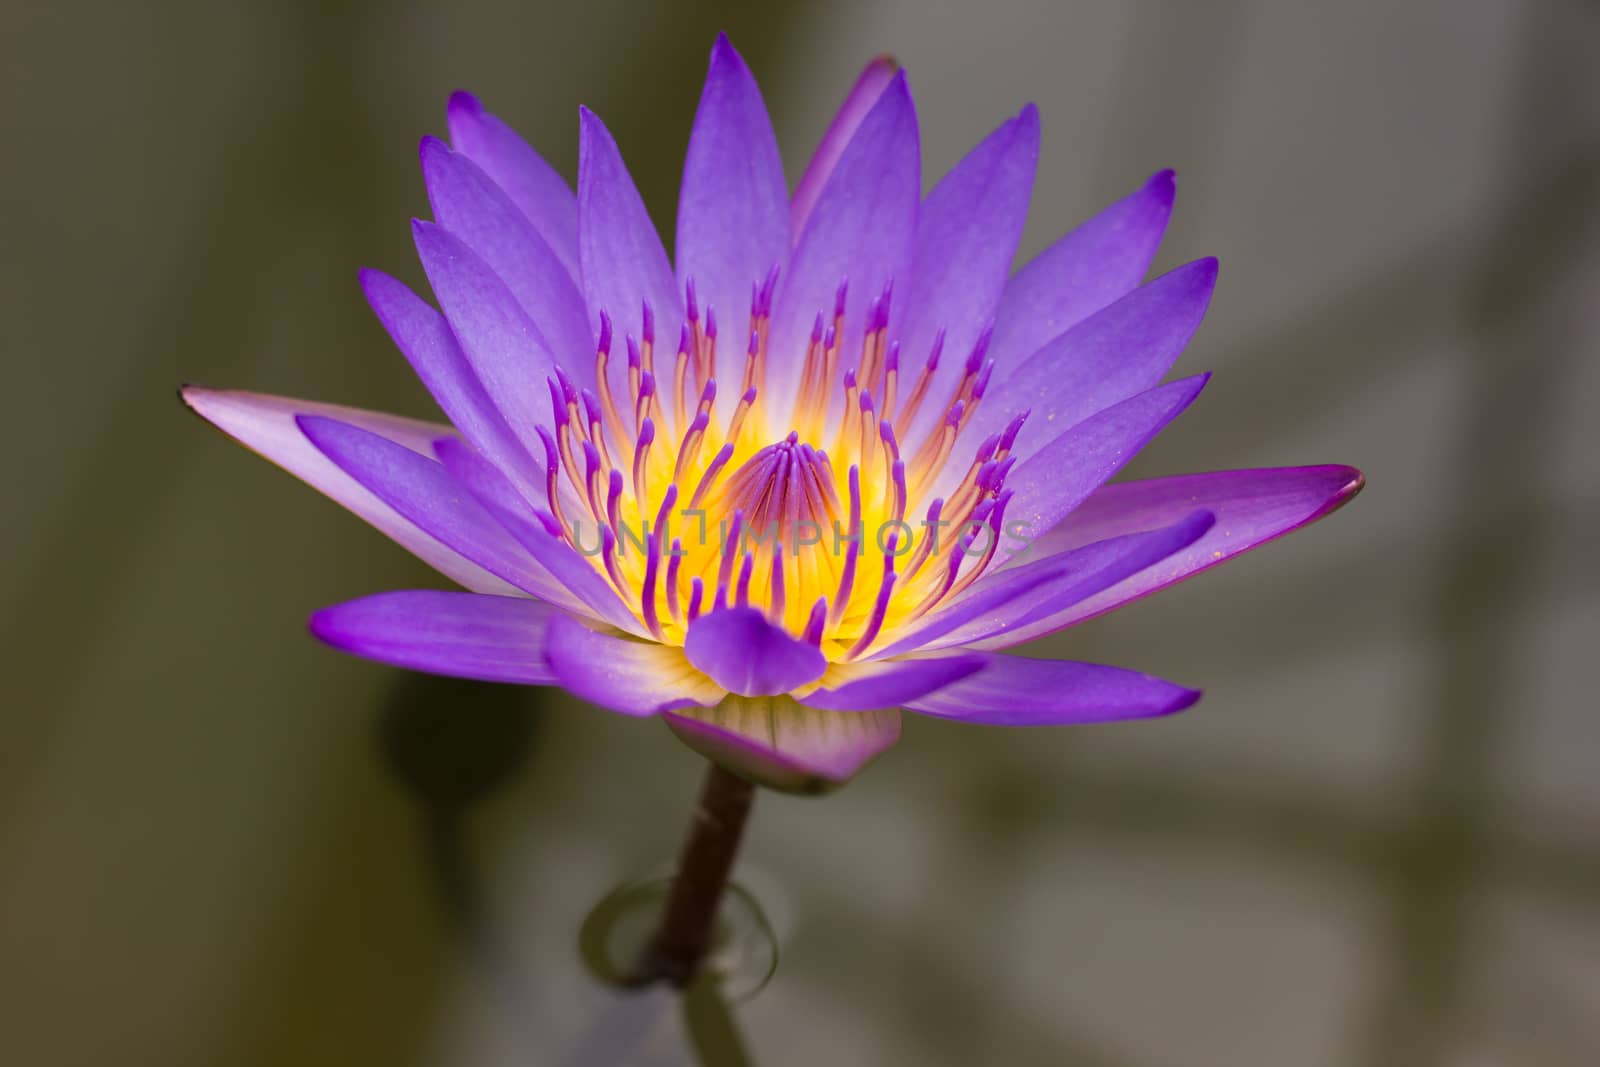 Purple and yellow color Lotus flower in the bolw.